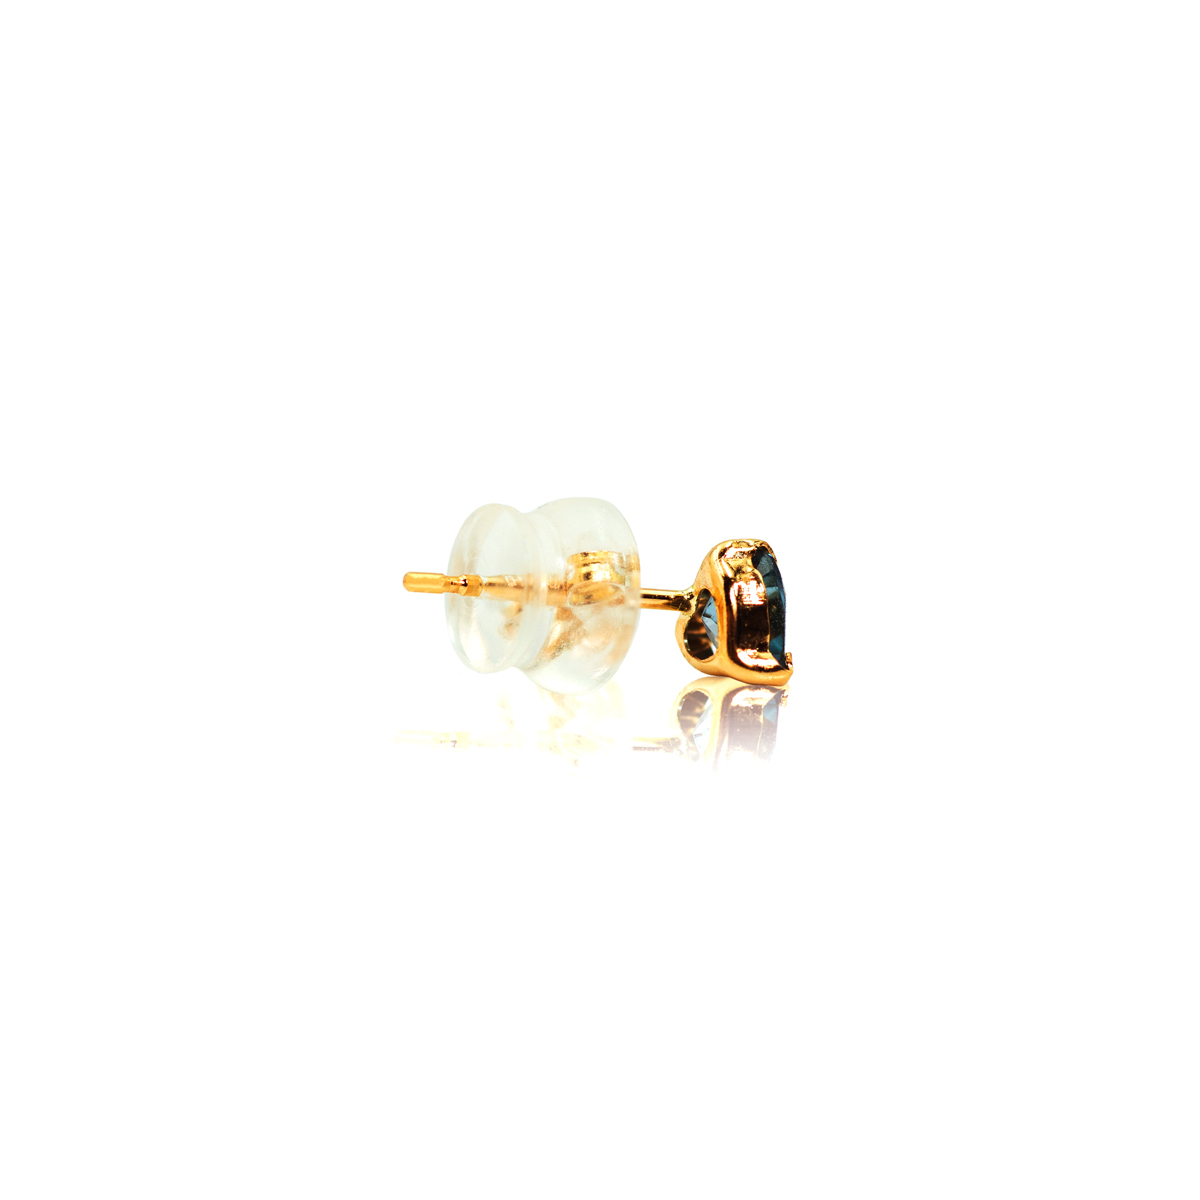 Heart Shaped Stud Earrings in 18k Yellow Gold with Blue Topaz